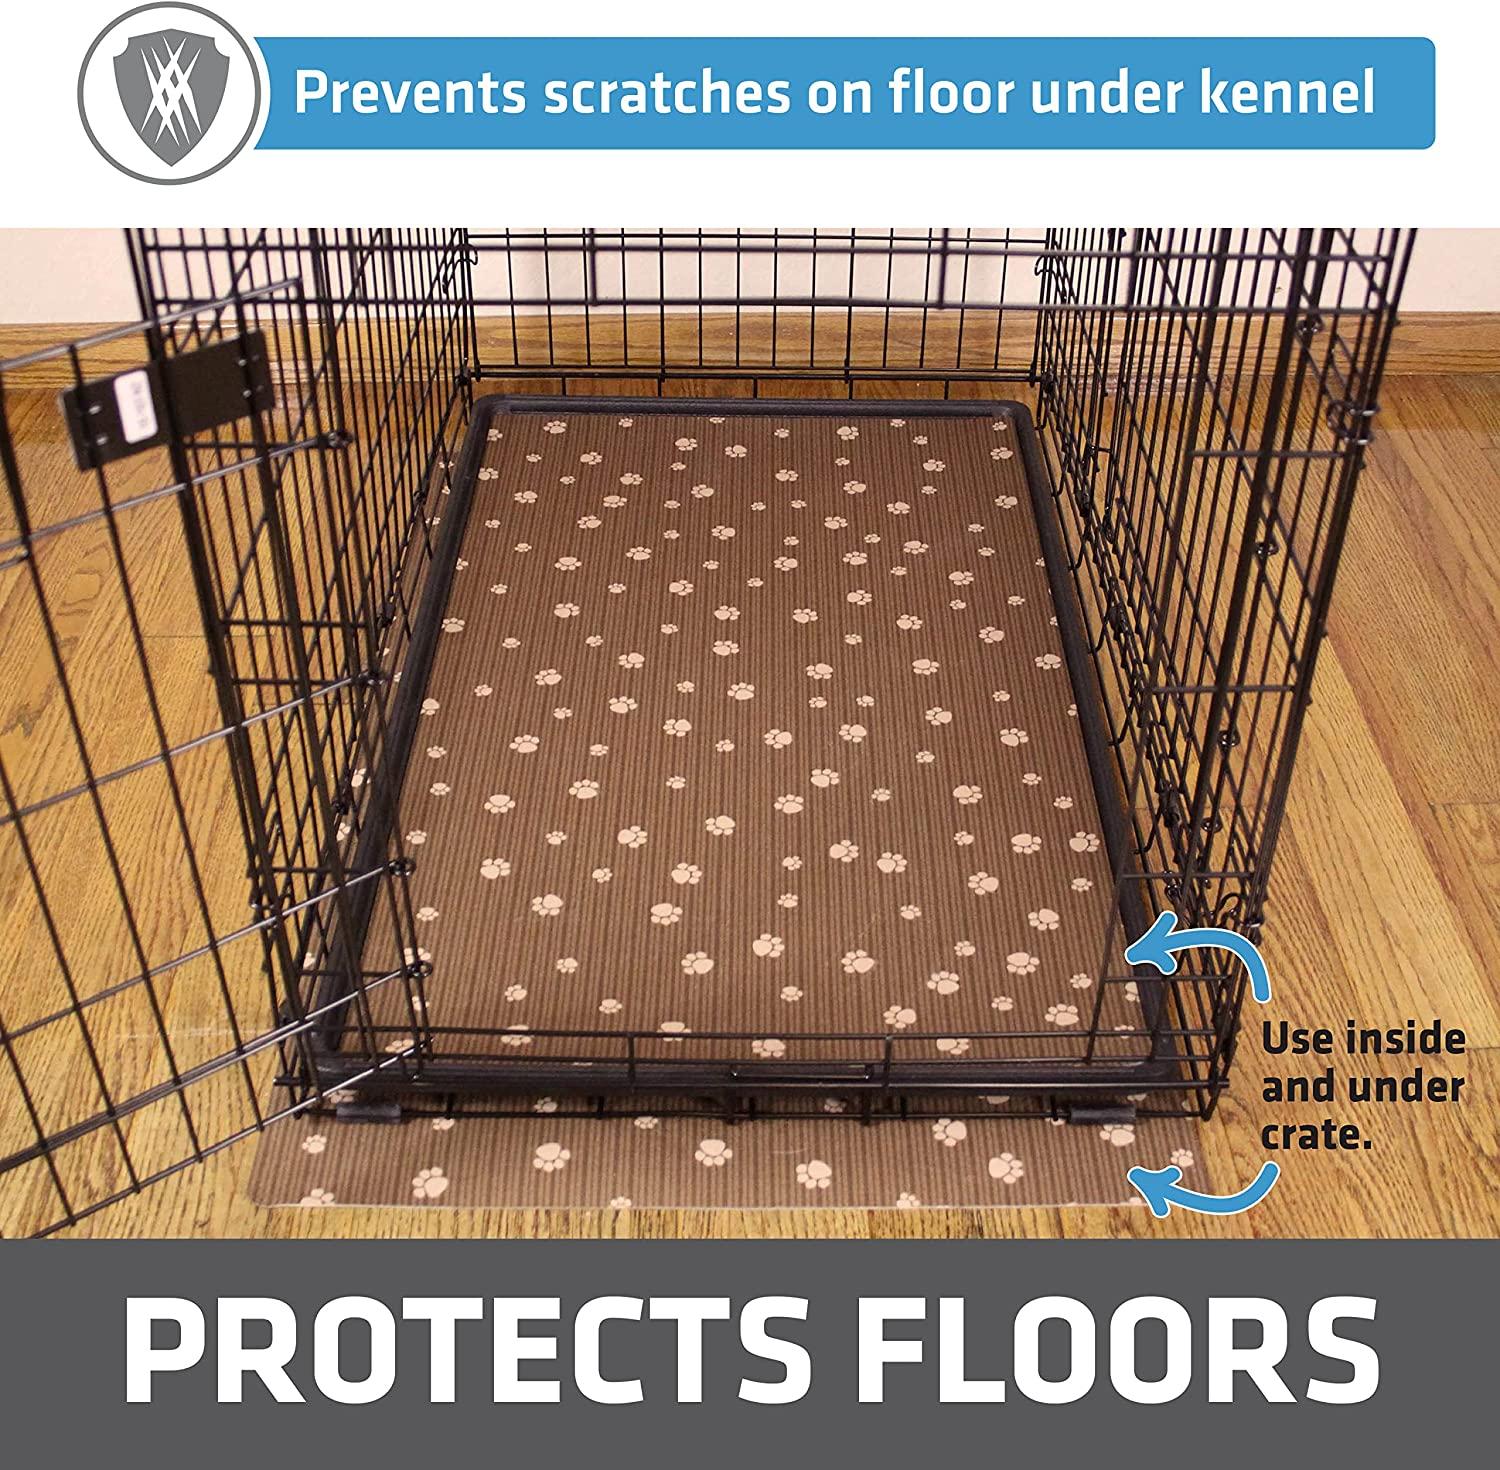 Drymate Dog Crate Mat Liner, Absorbs Urine, Waterproof, Non-Slip, Washable  Puppy Pee Pad for Kennel Training - Use Under Pet Cage to Protect Floors